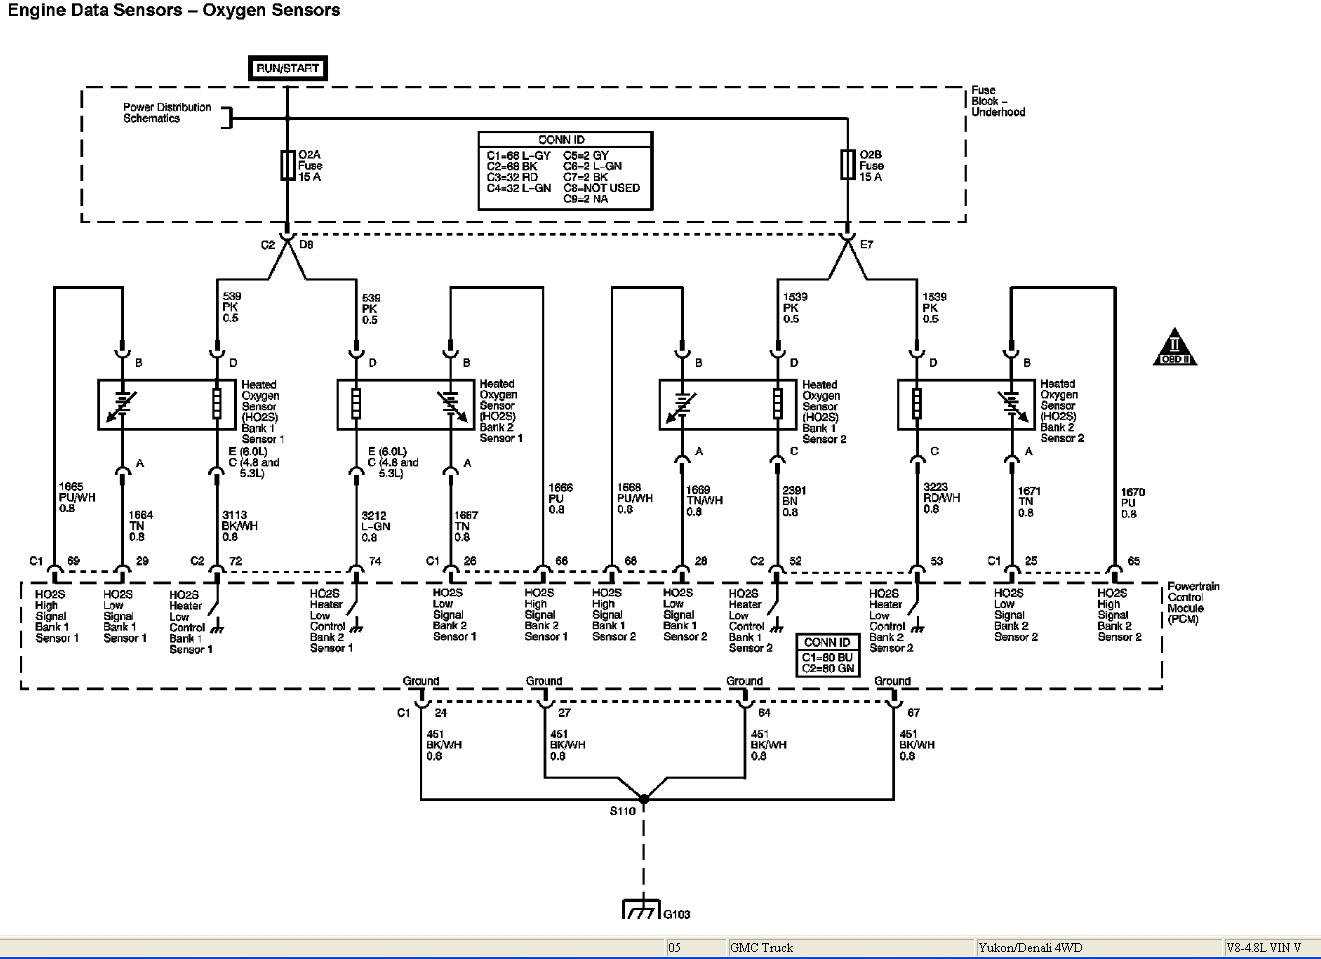 Wiring Diagram 2005 Gmc 1500 Trouble Rewiring O2 Sensor Harness after Dogs ate It – Motor … Of Wiring Diagram 2005 Gmc 1500